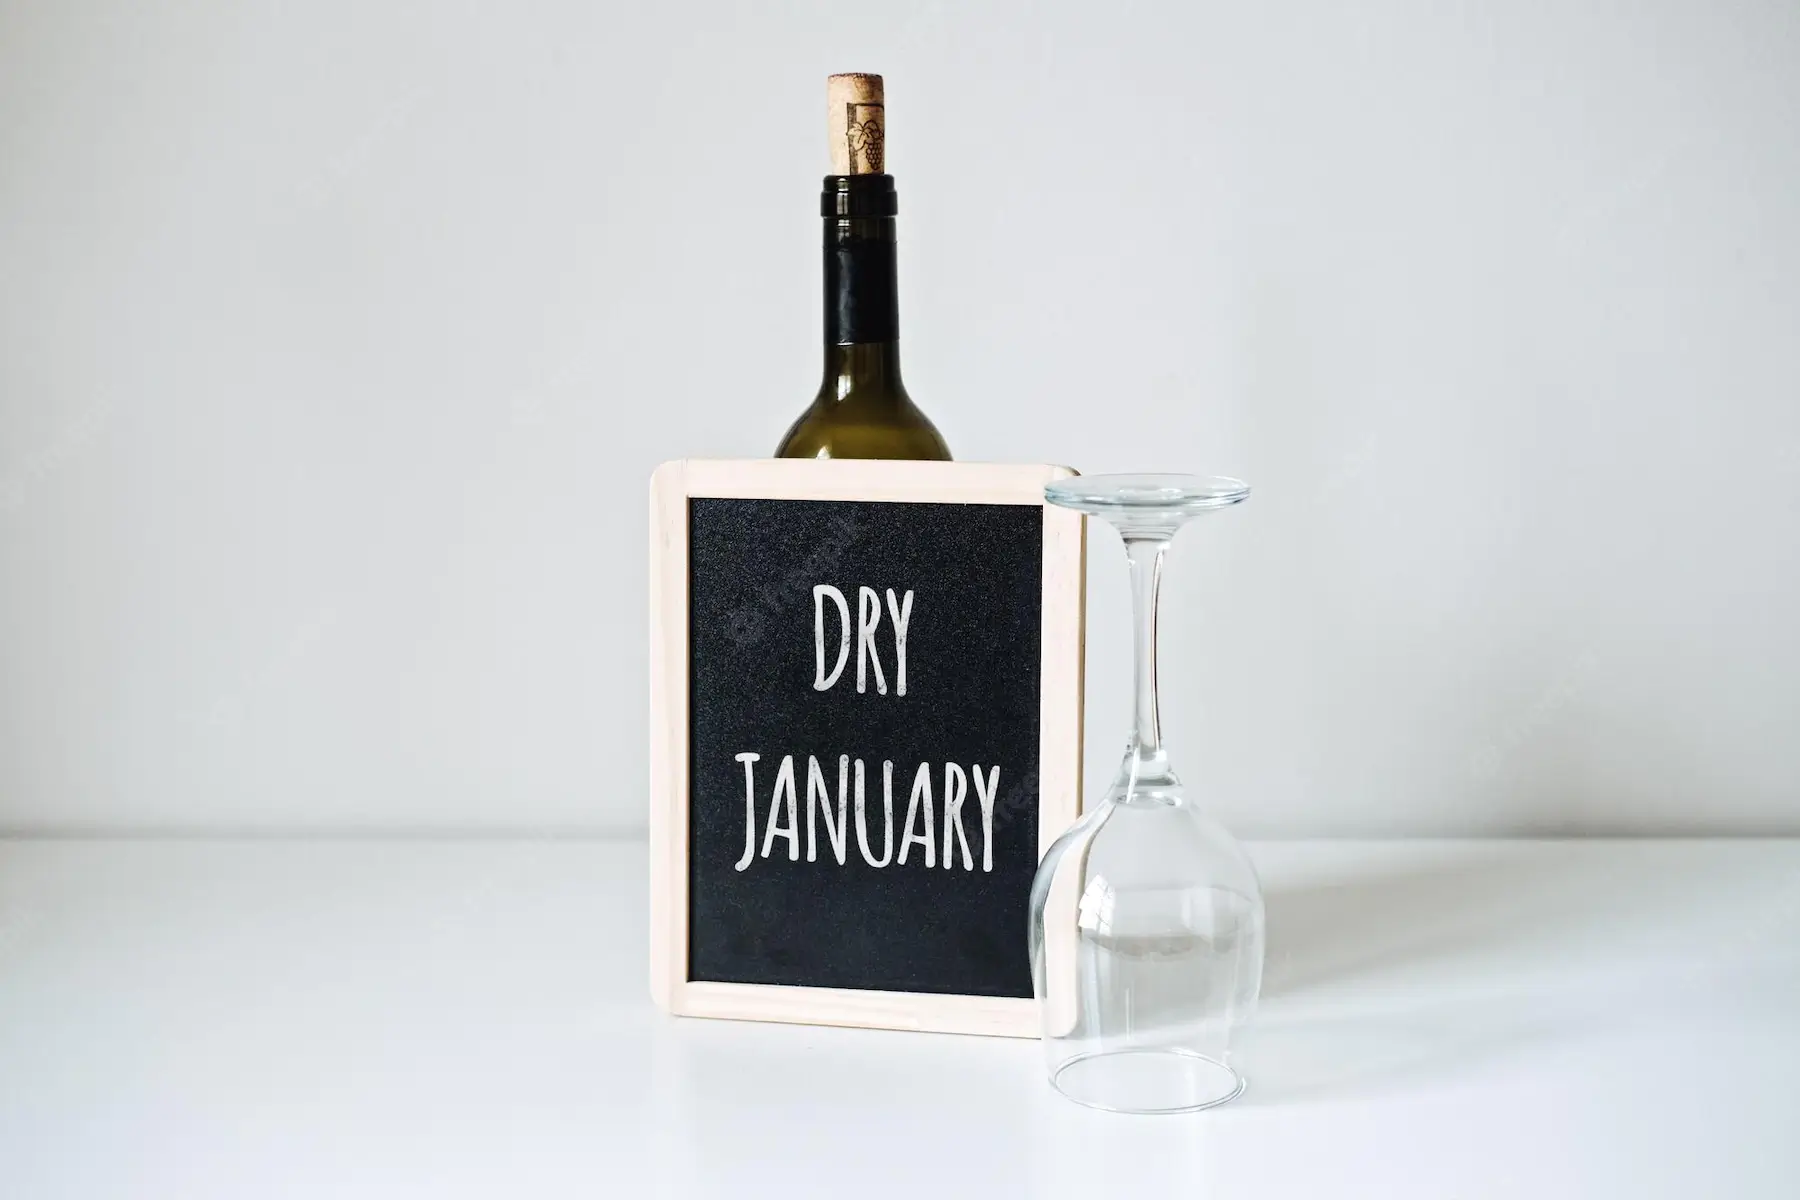 Increased popularity of Dry January